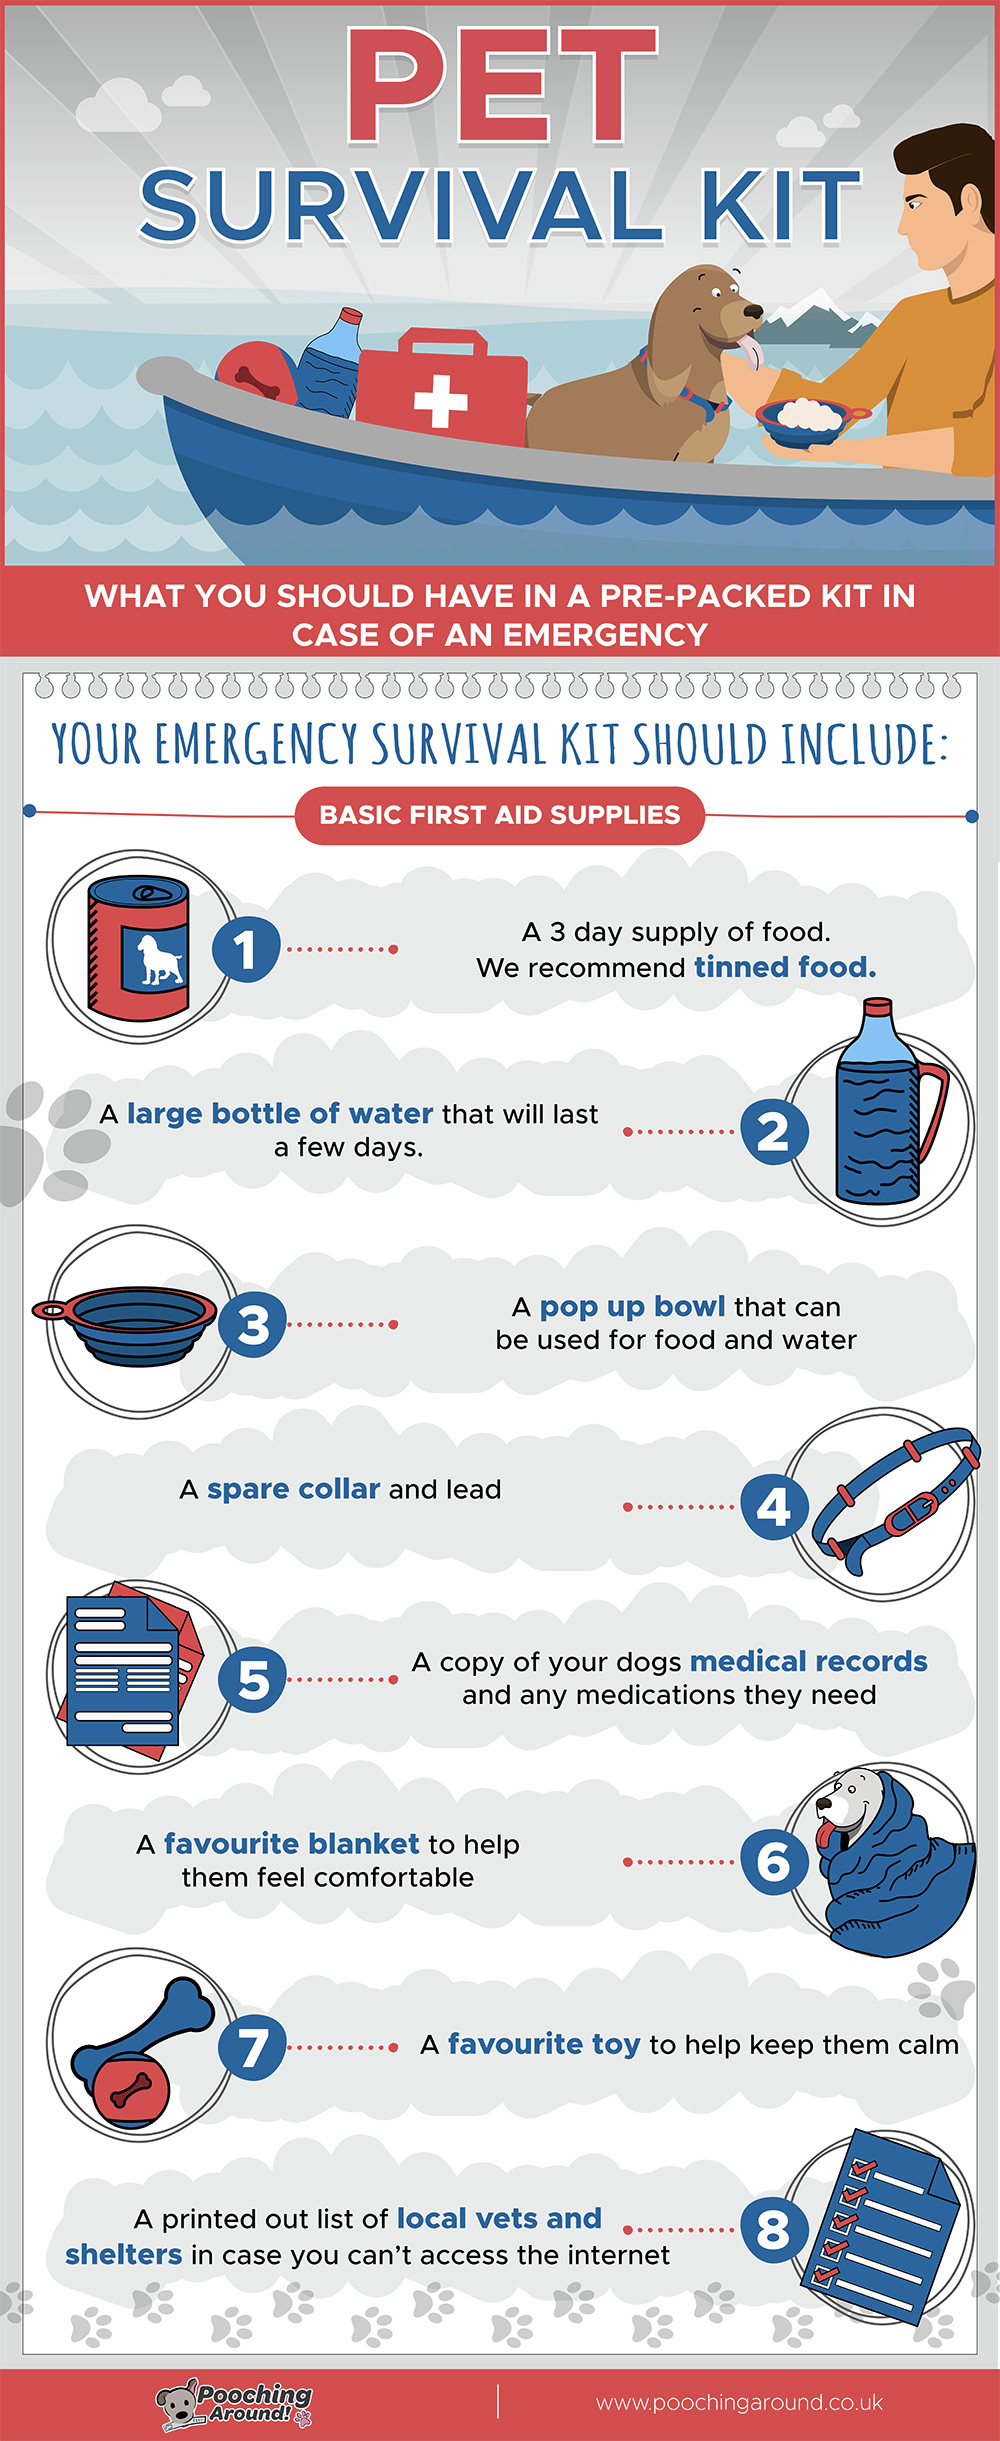 Emergency Surival Kit for Dogs